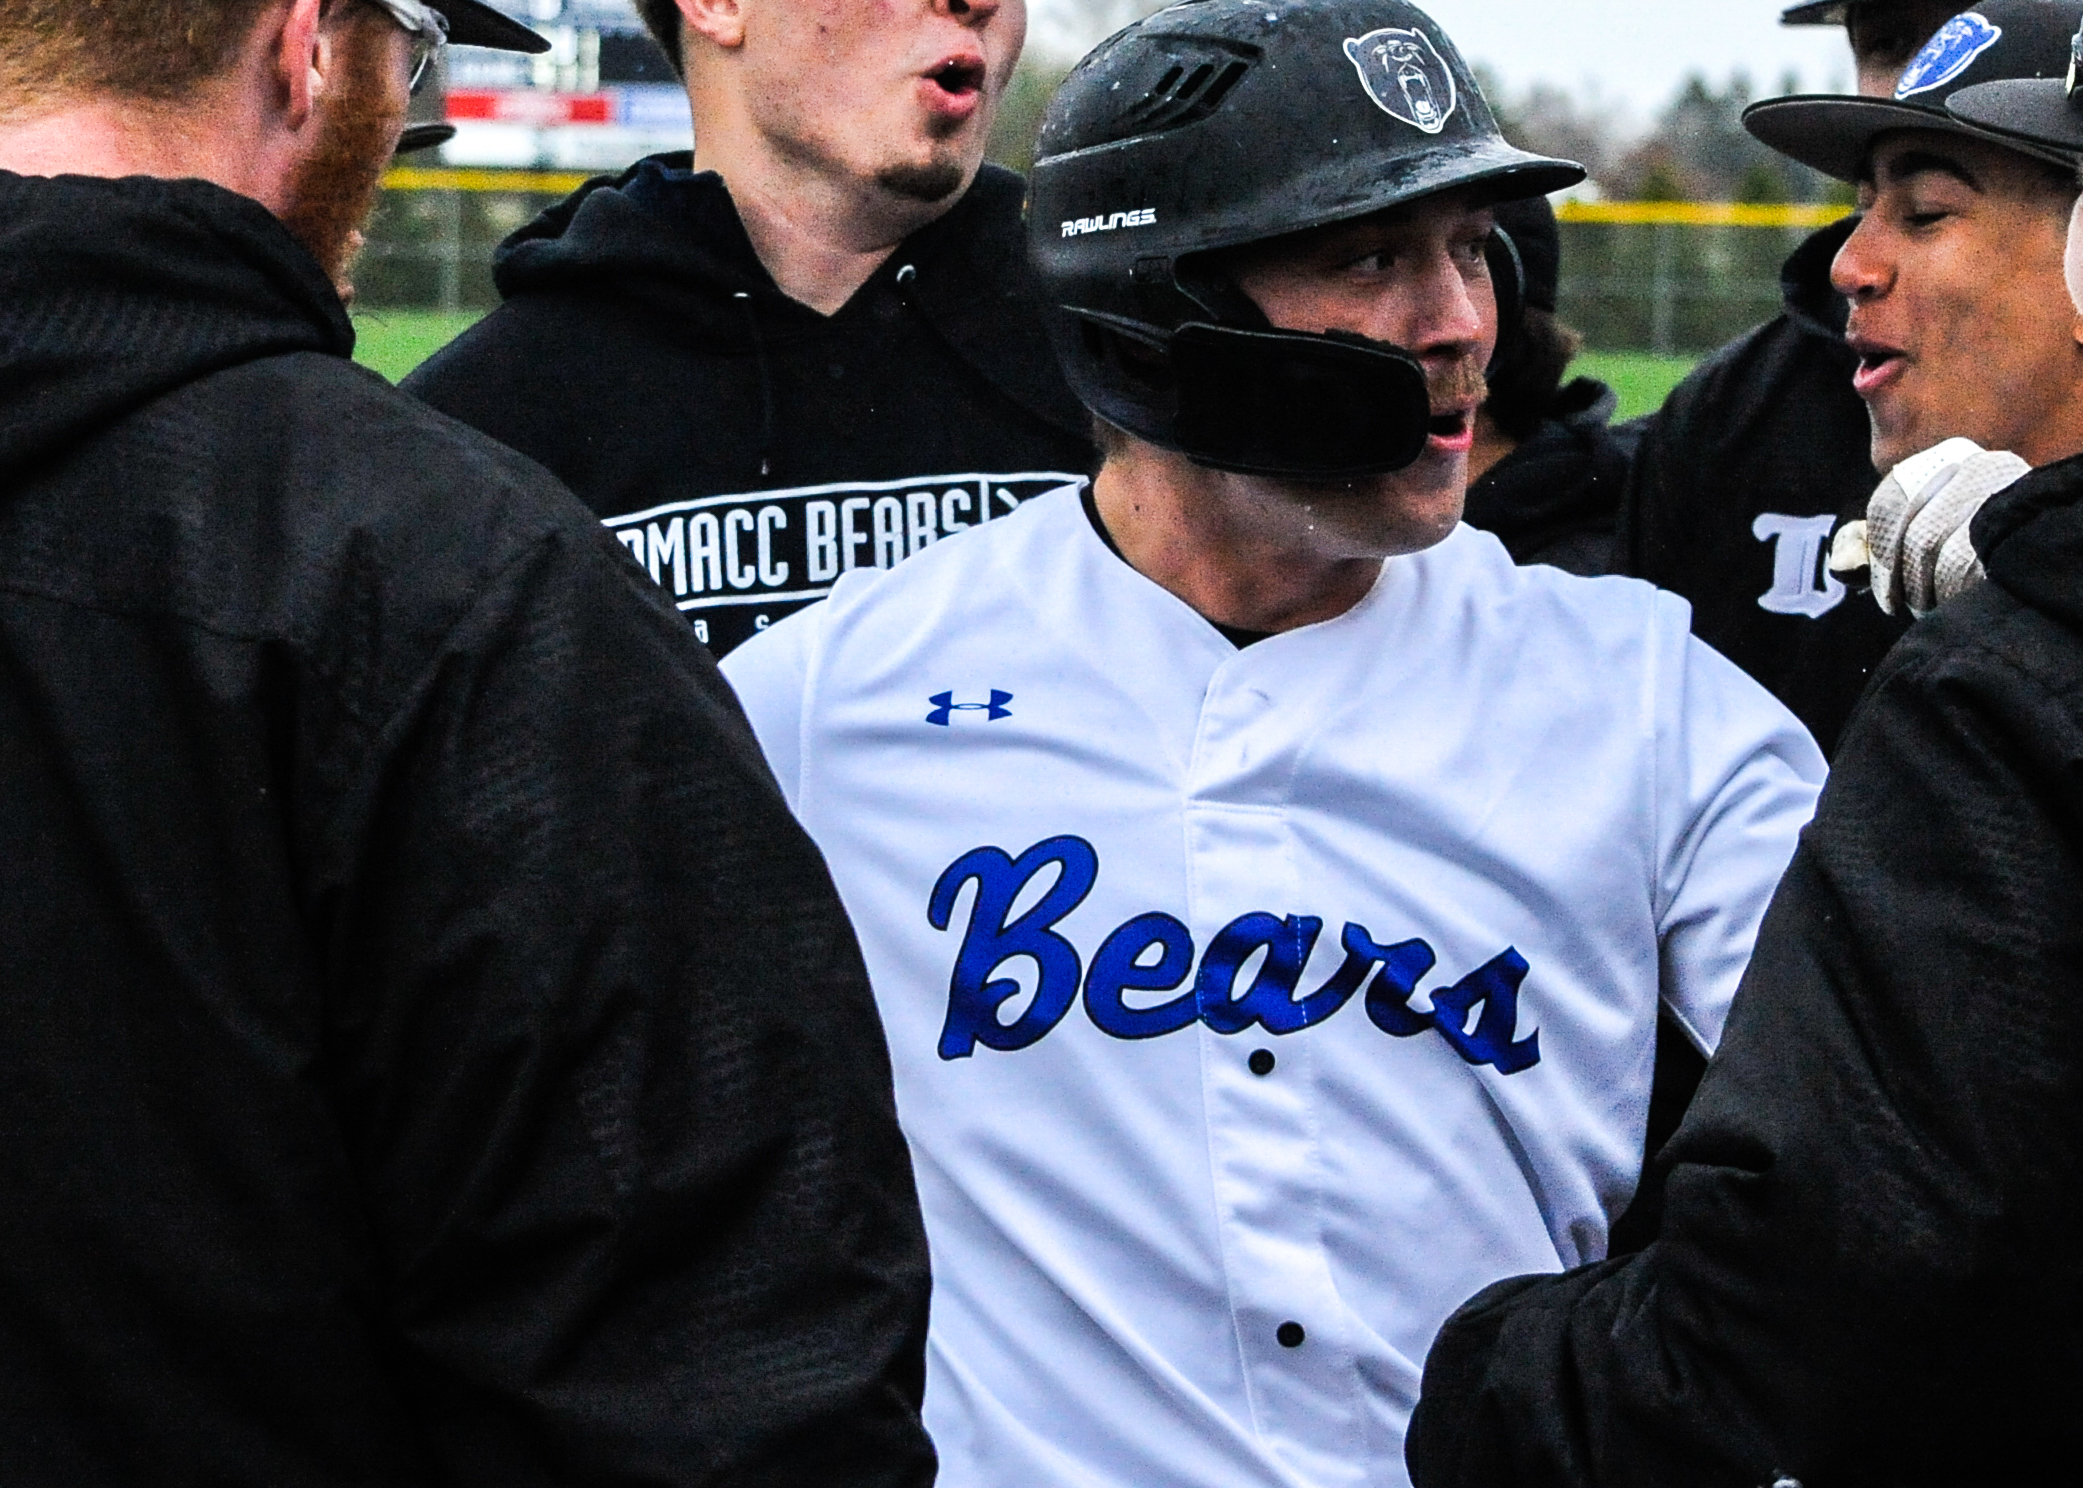 DMACC baseball team sweeps three-game series from ILCC